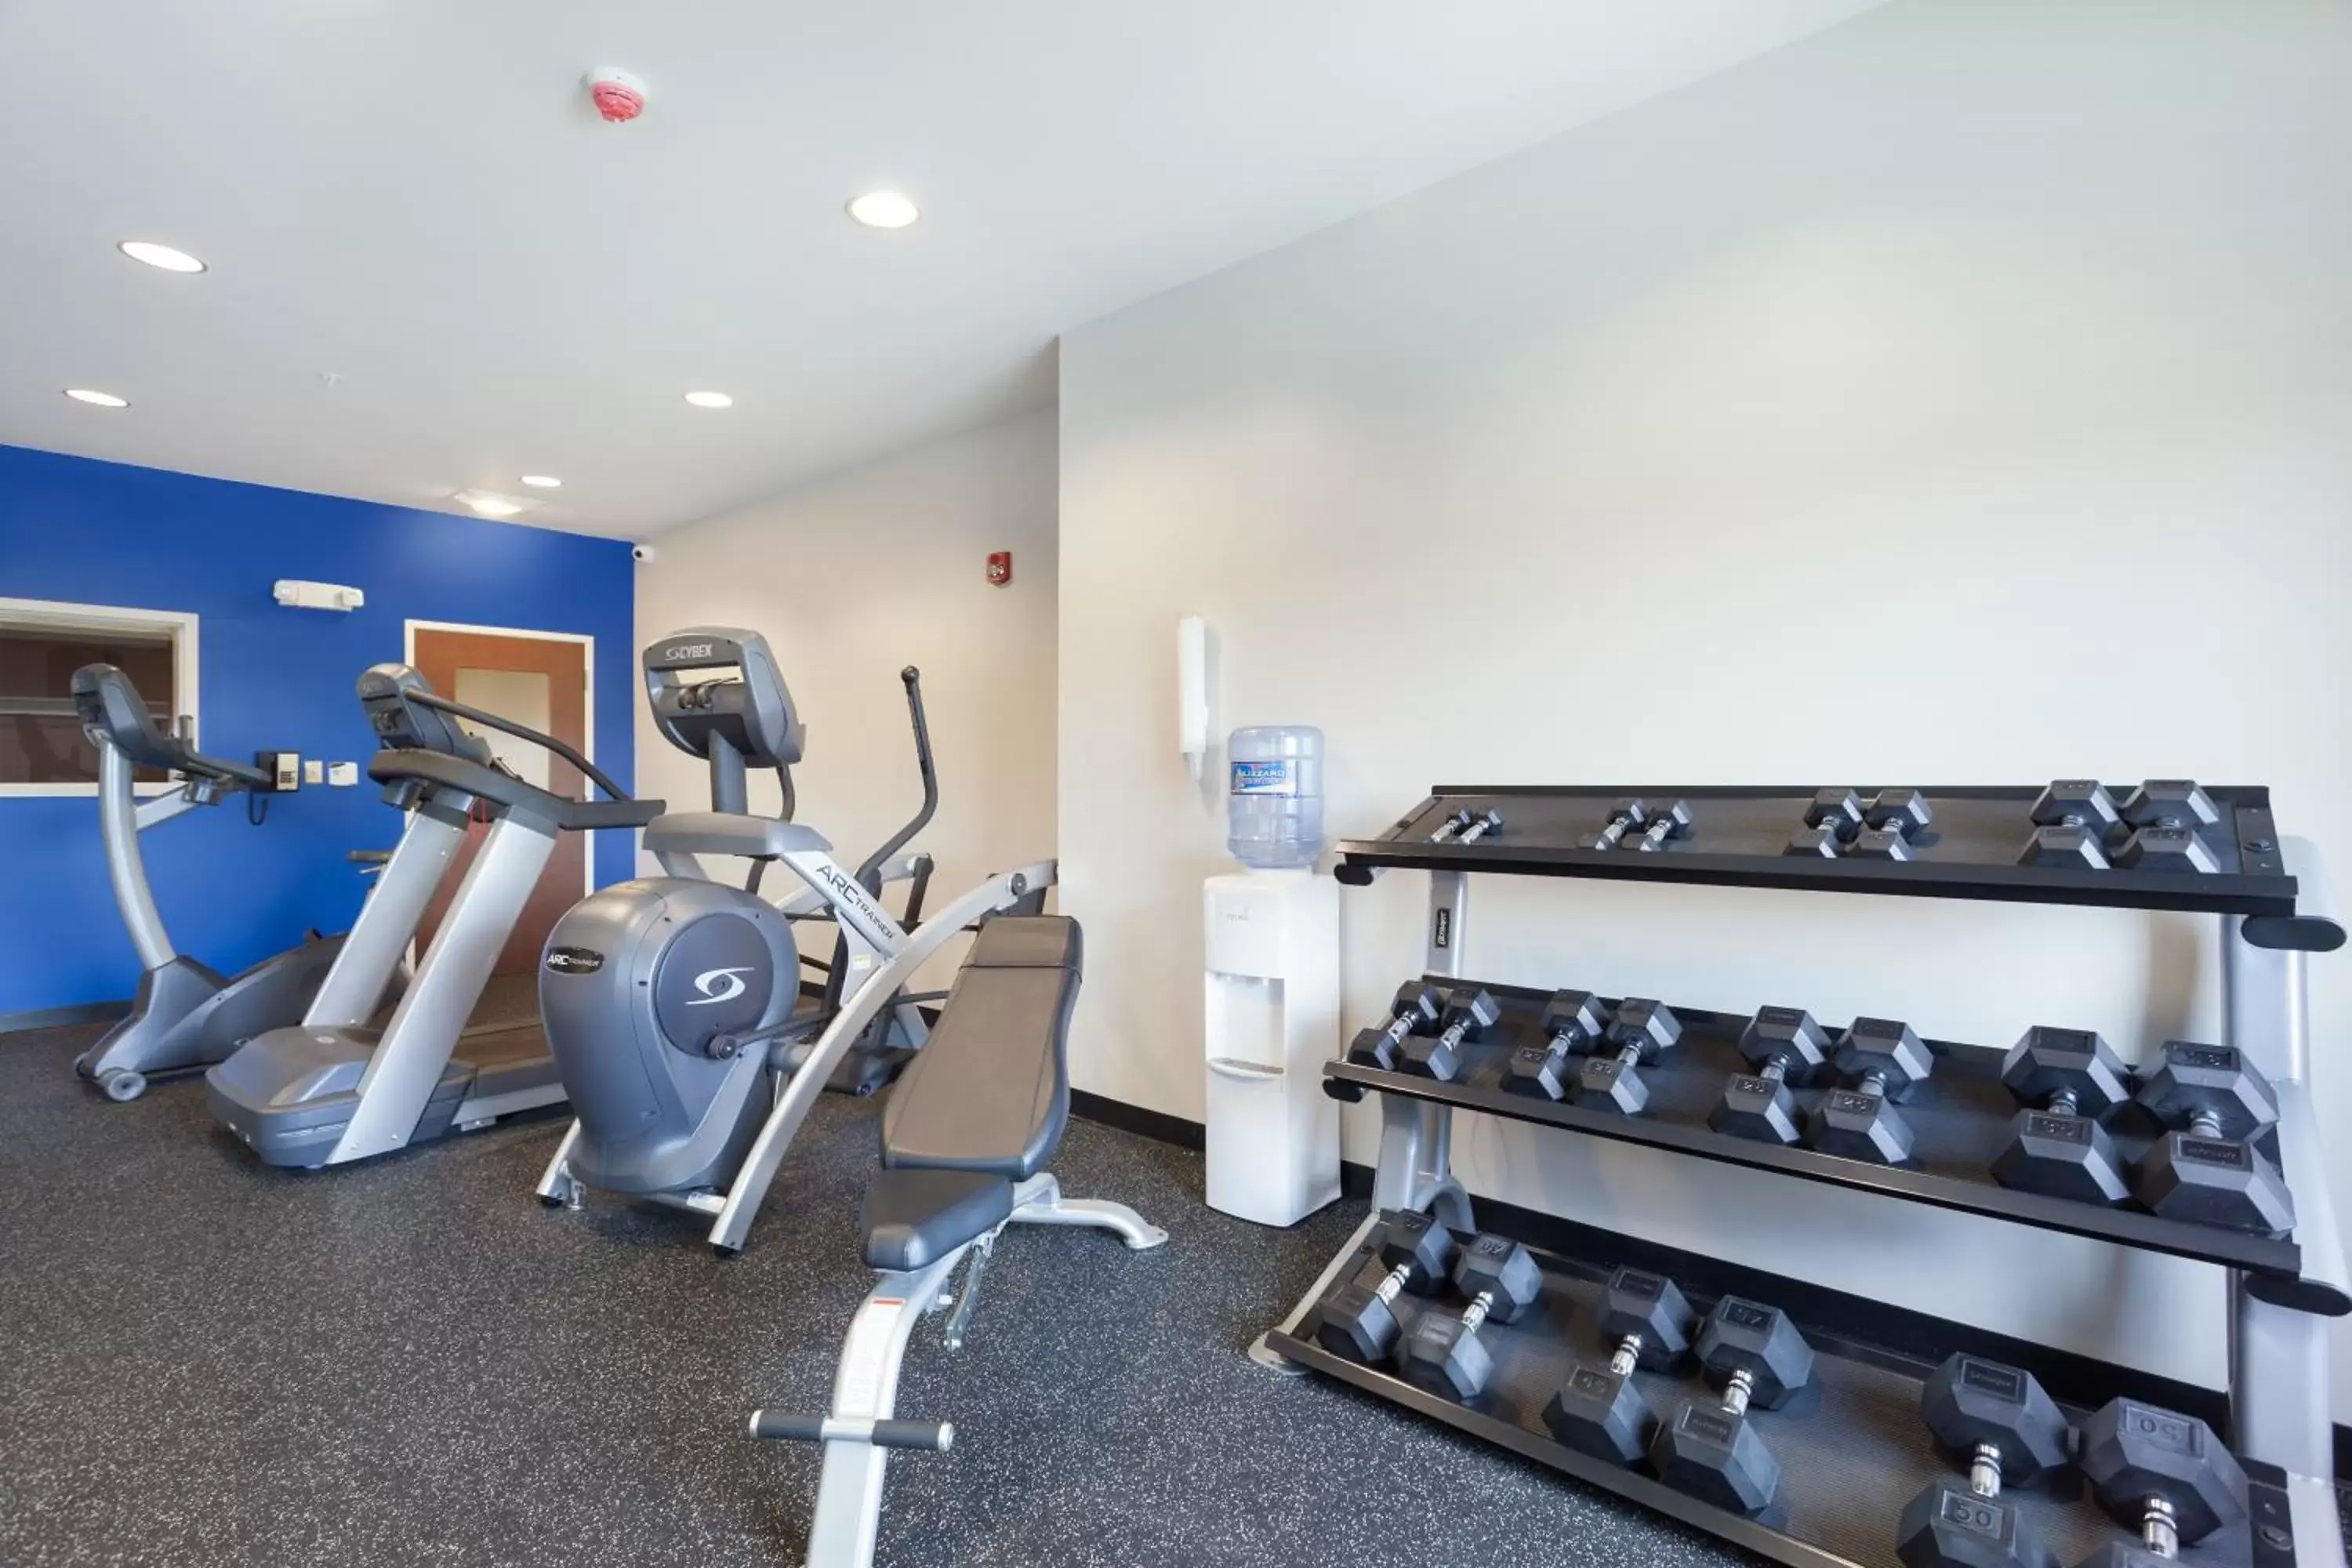 Fitness centre/facilities, Fitness Center/Facilities in Microtel Inn & Suites by Wyndham Georgetown Delaware Beaches